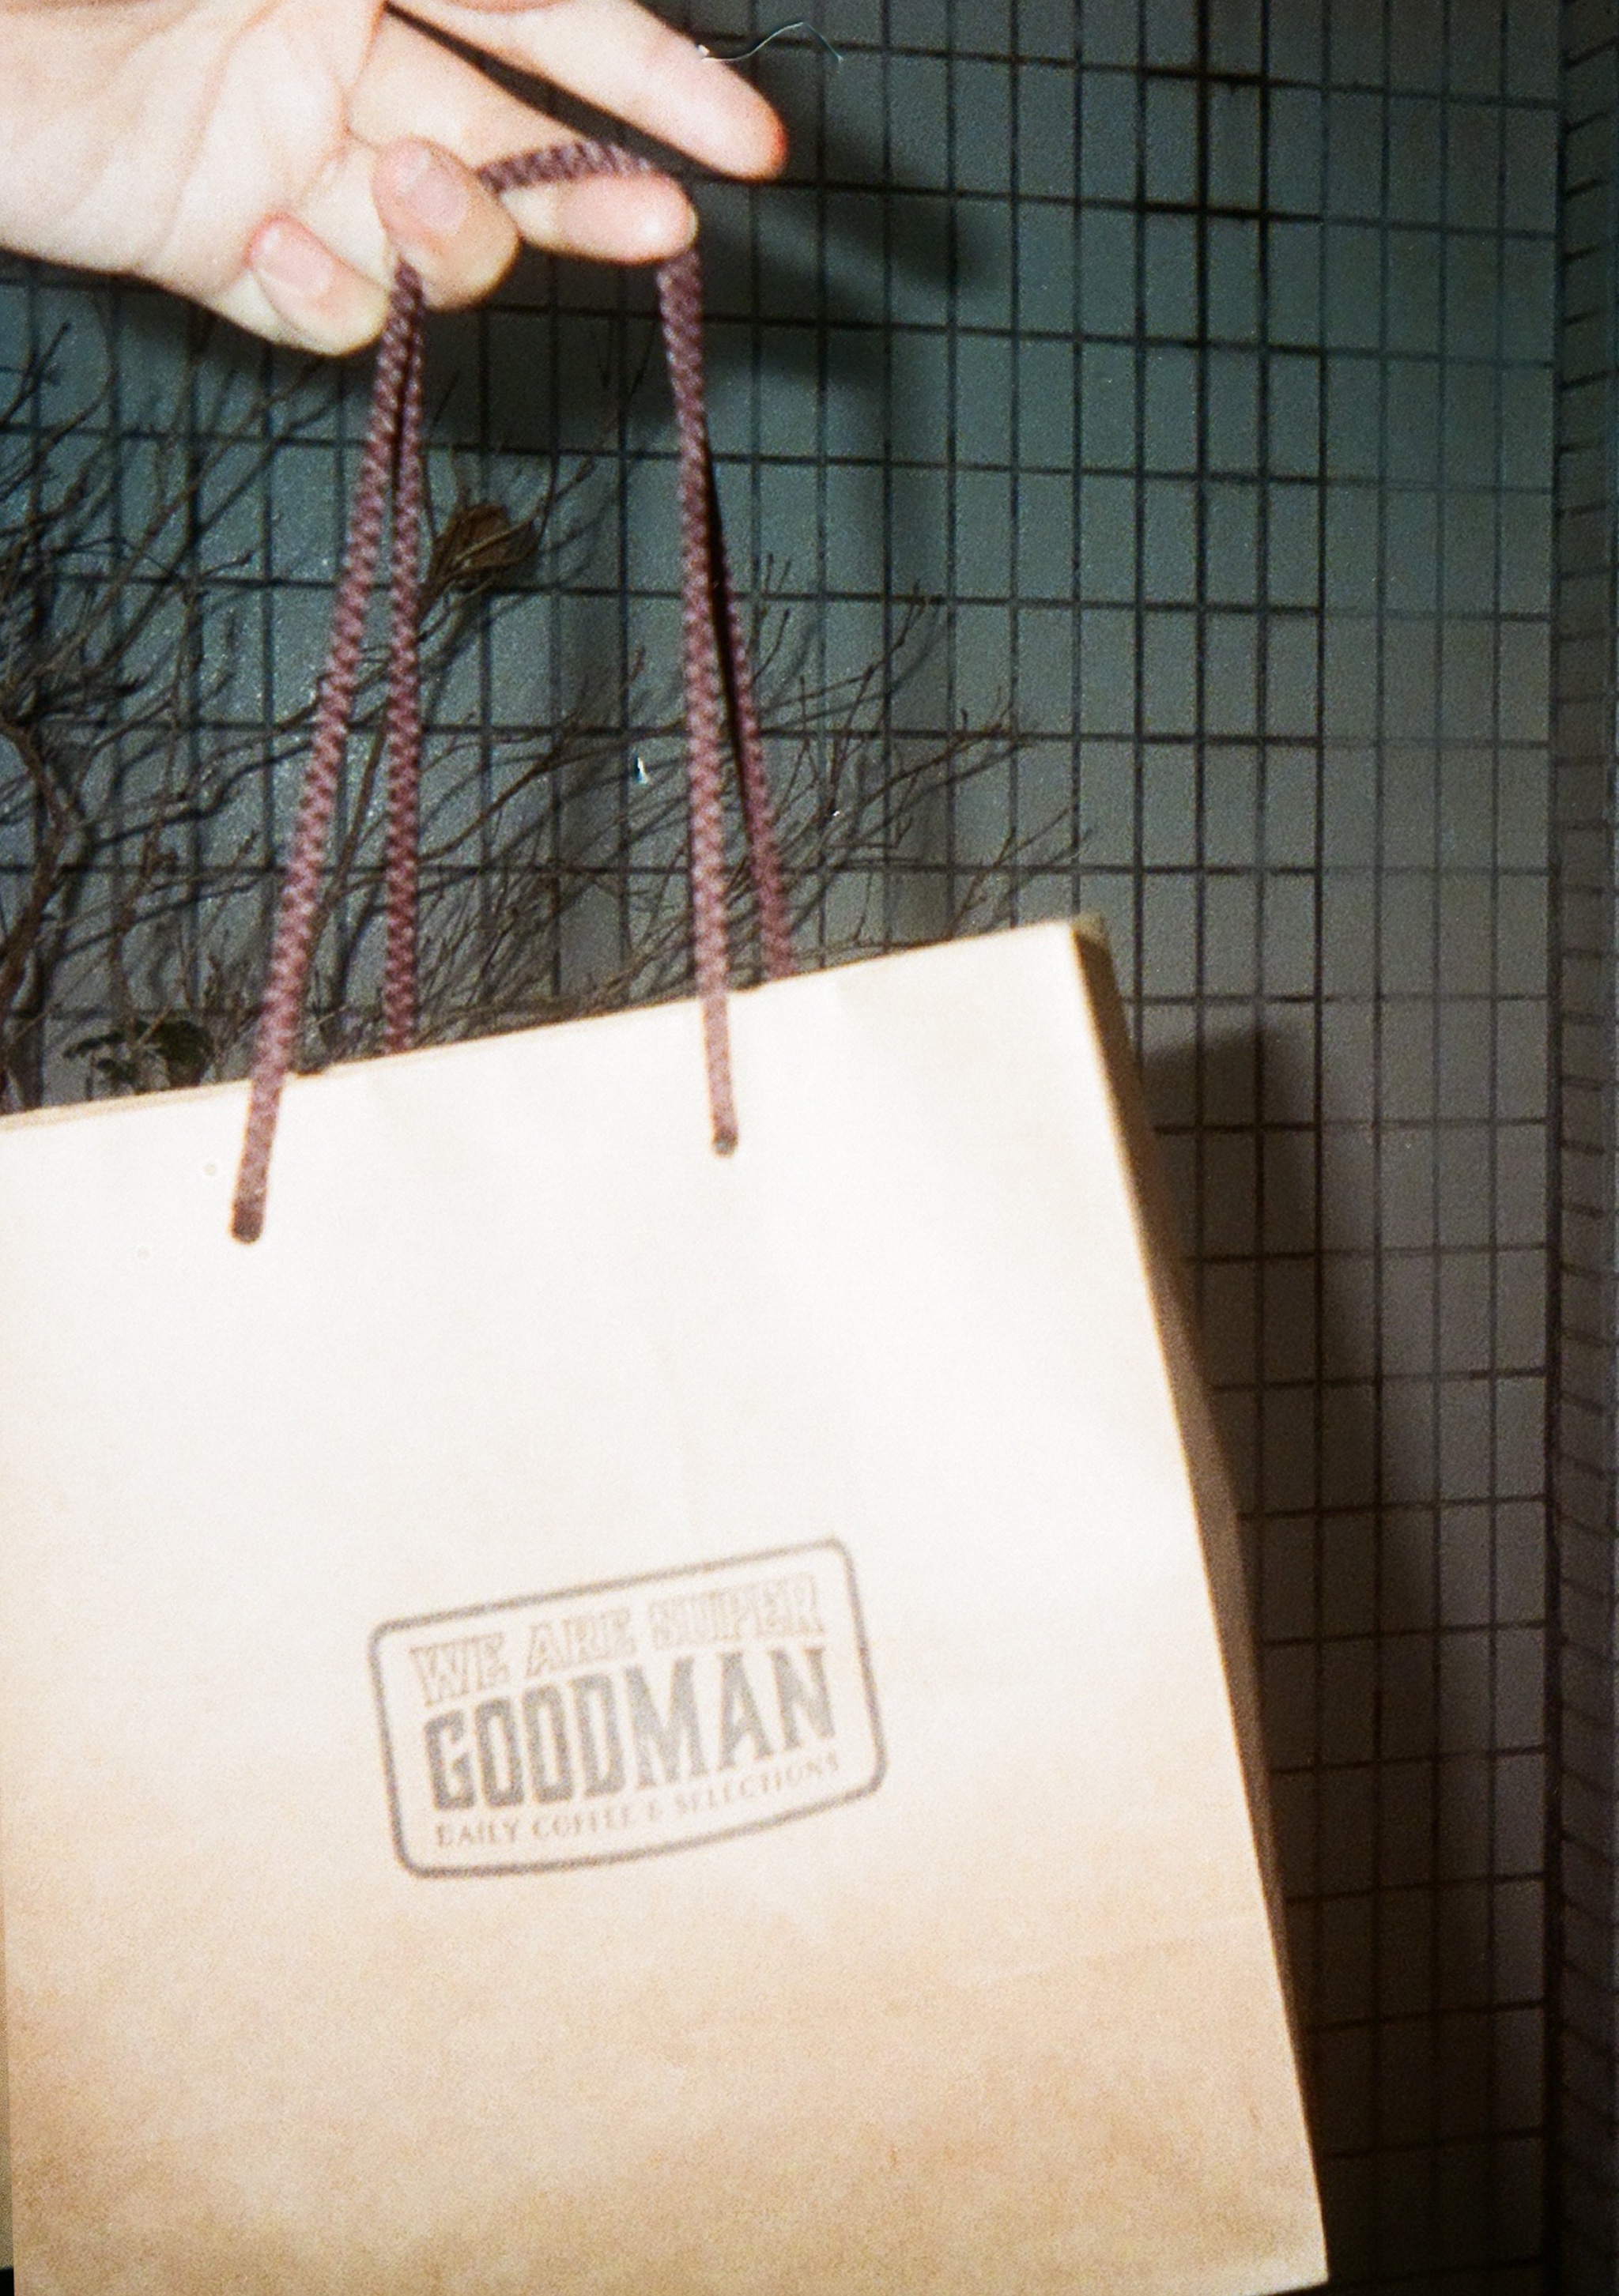 Hand holding a paper bag reading WE ARE SUPER GOODMAN, DAILY COFFEE & SELECTIONS.